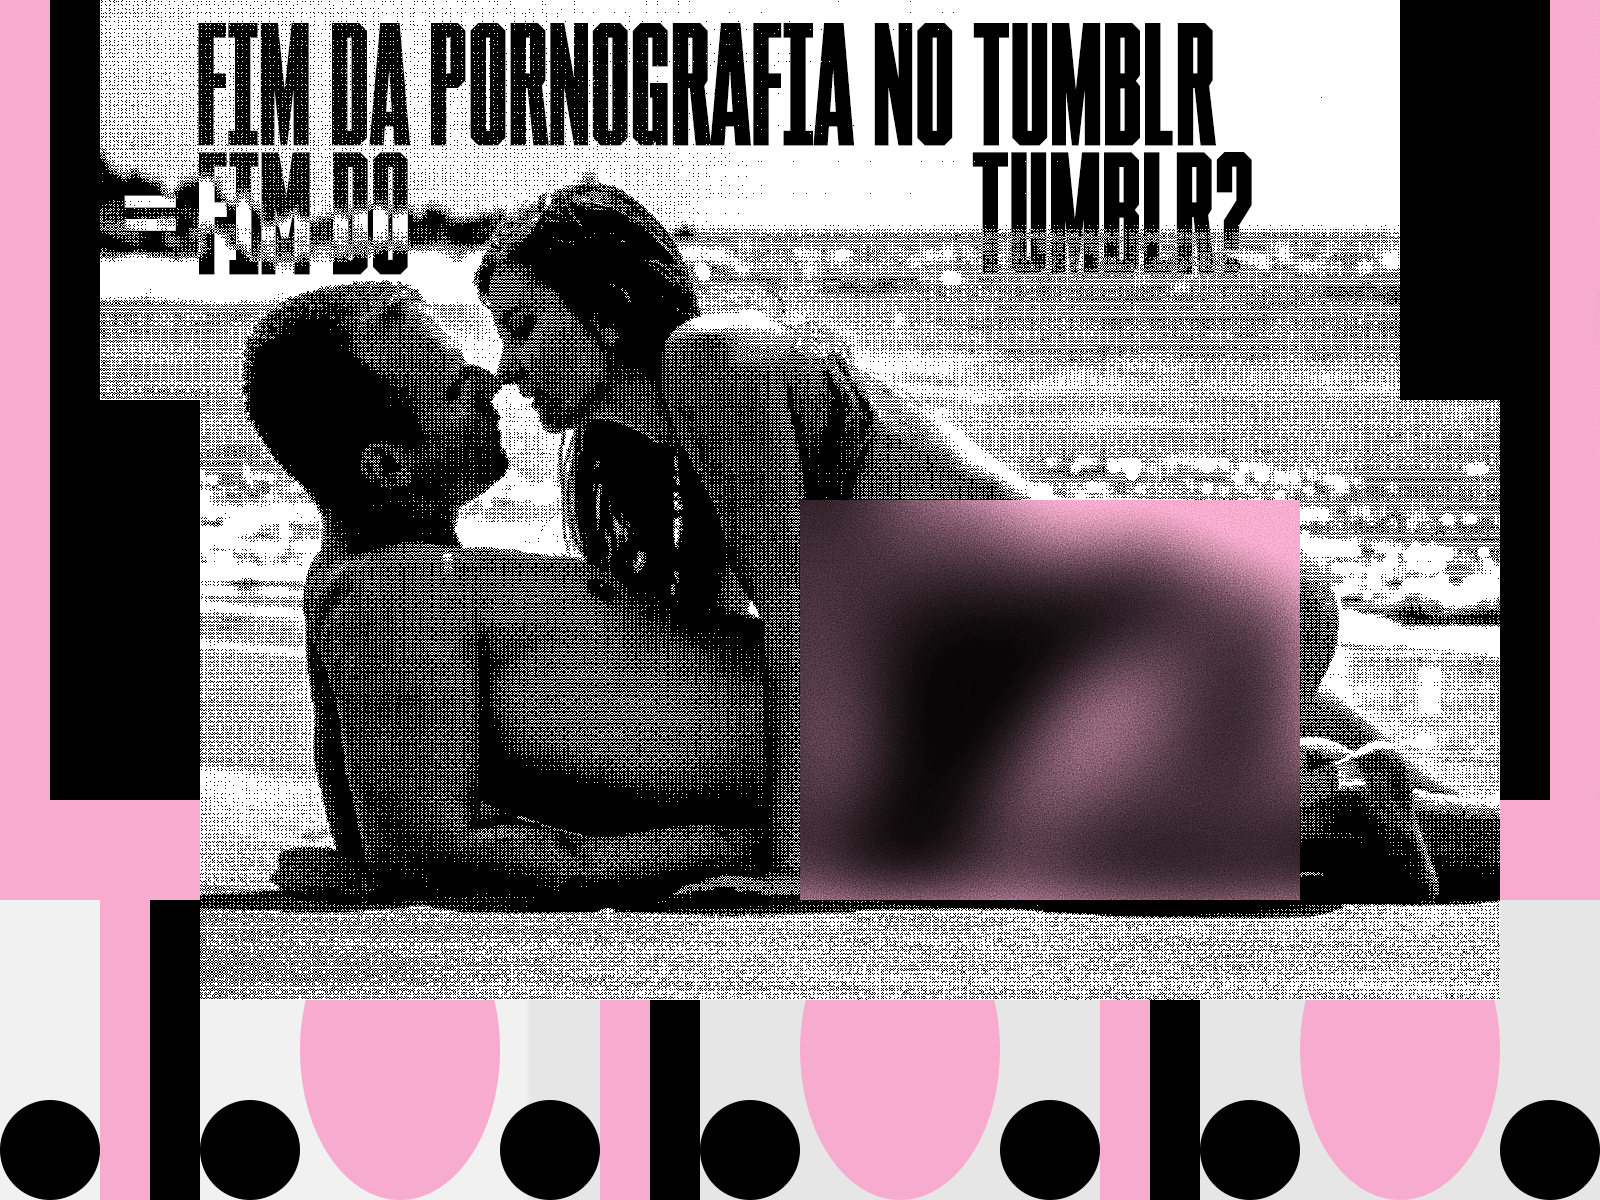 exploration.2018.12.06-B black and white caps collage dither editorial illustration glitch illustration lo fi porn sex type typography